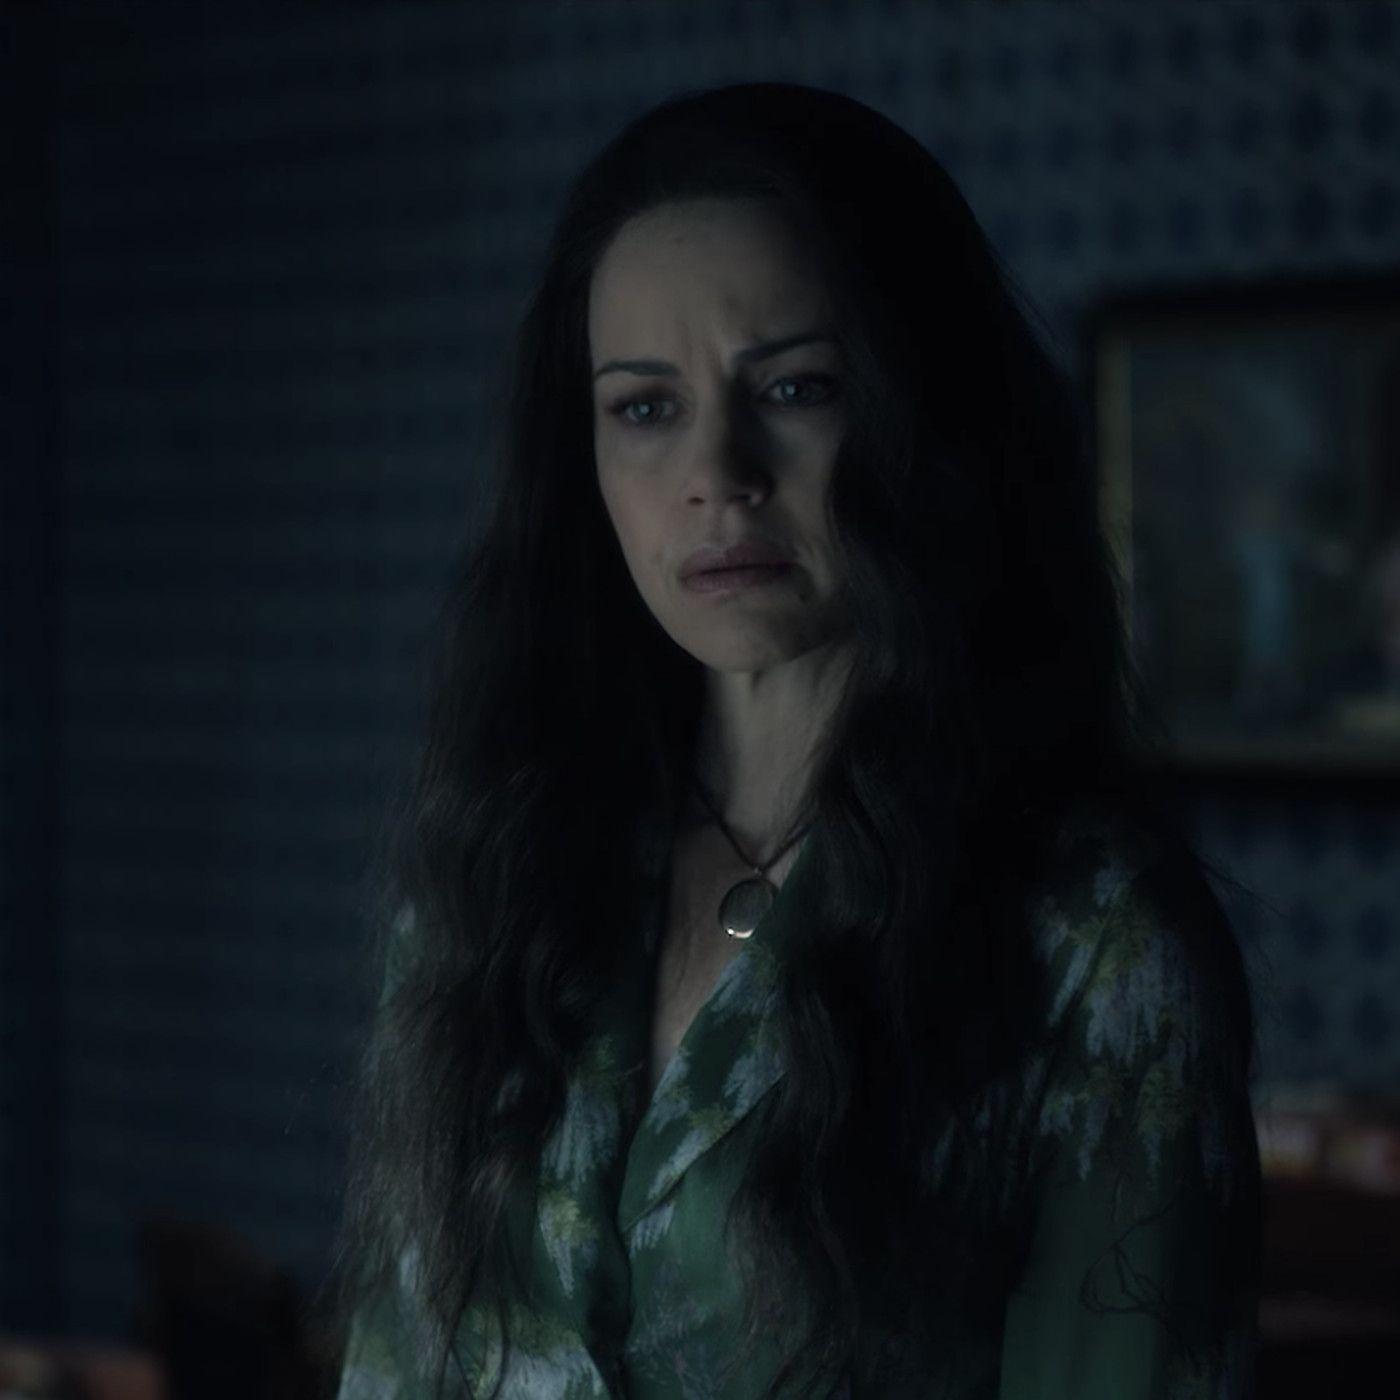 Netflix's first The Haunting of Hill House trailer is highly